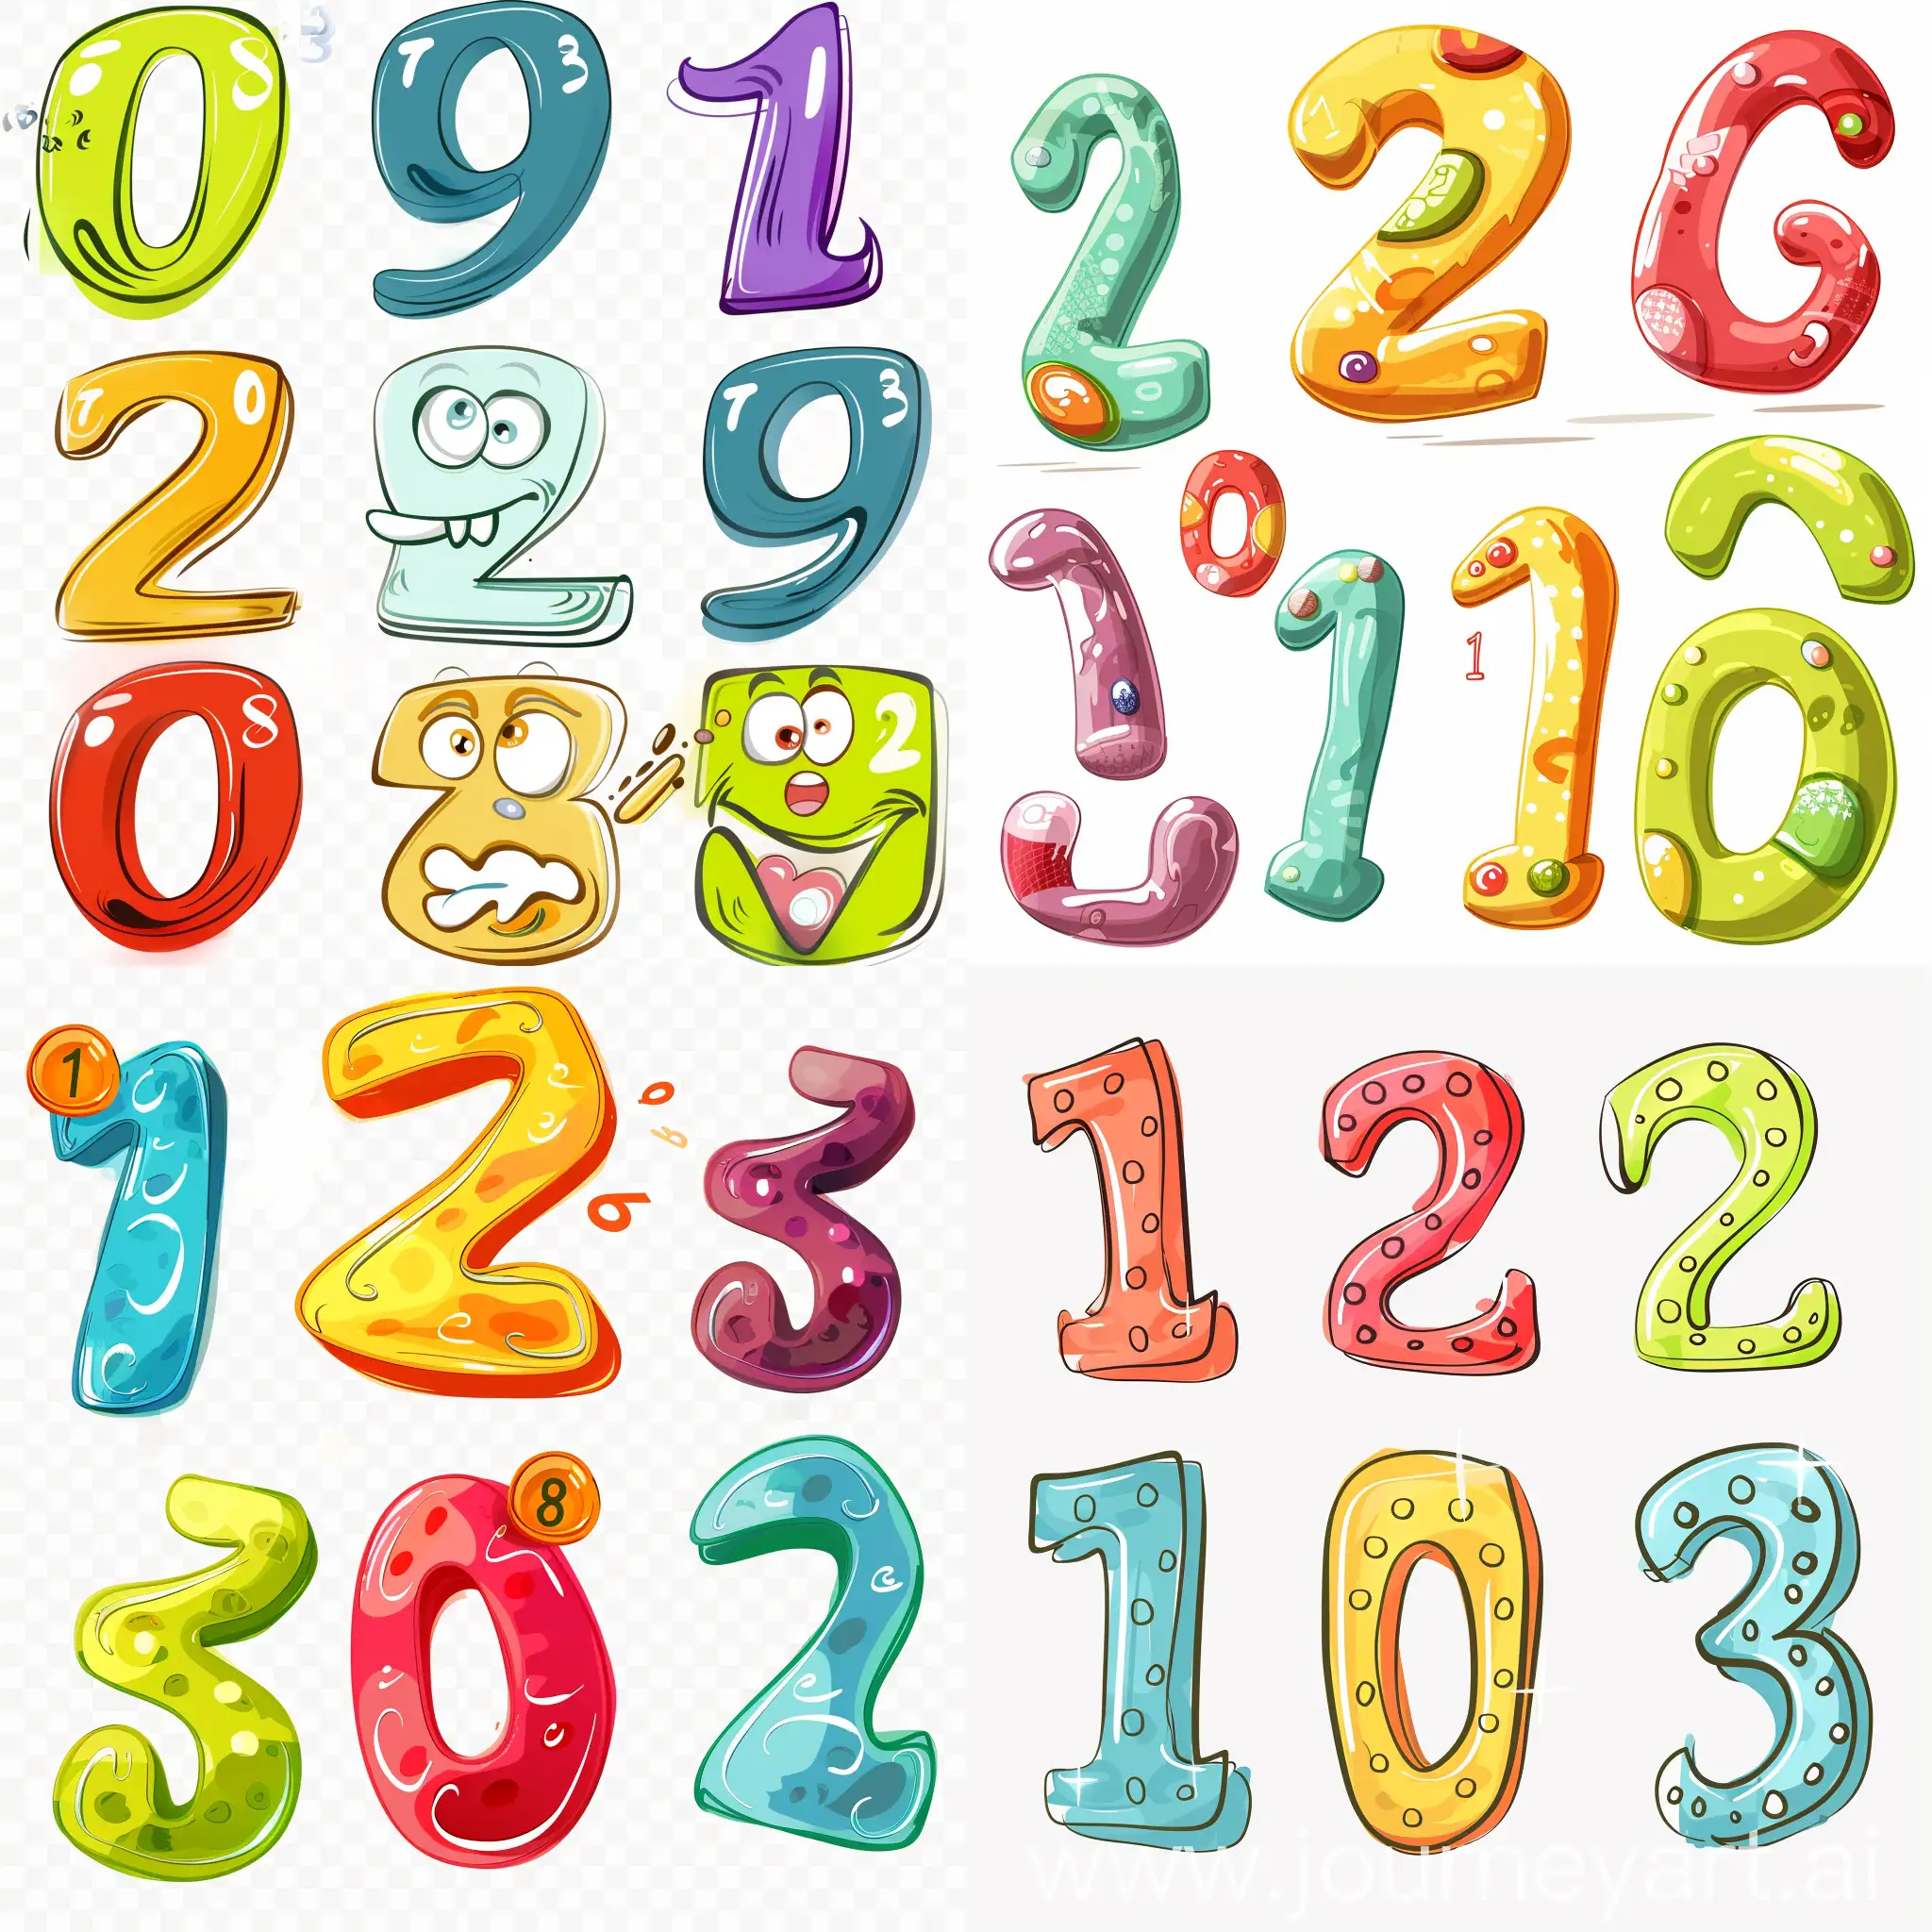 Playful-Cartoon-Numbers-Set-from-1-to-10-on-Transparent-Background